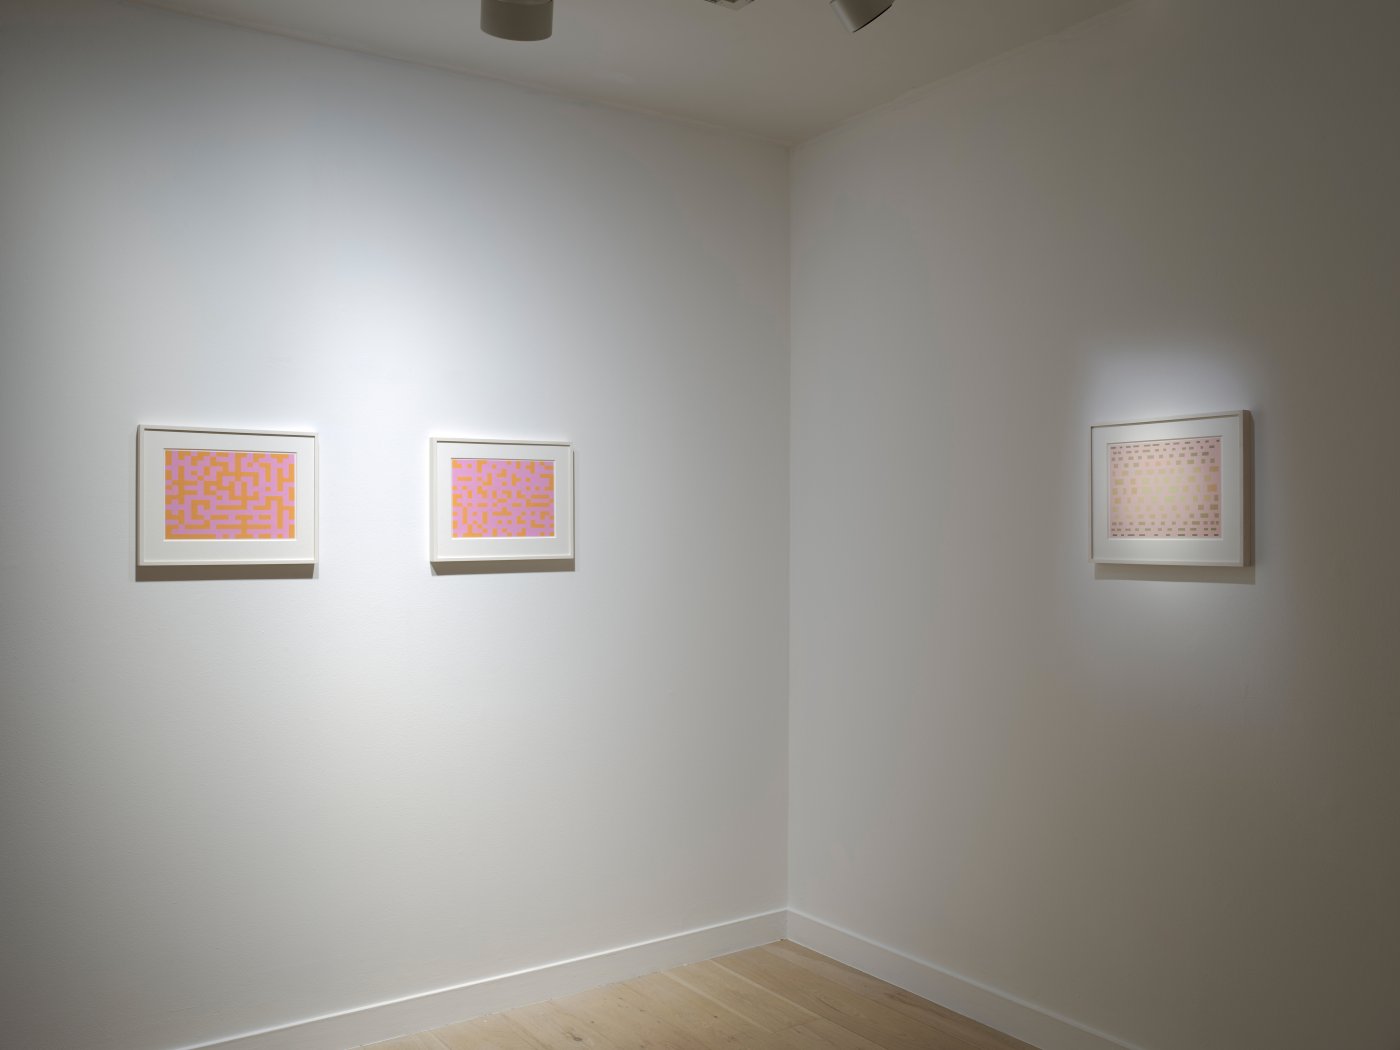 Installation image for Fred Sorrell: Ember, at Parafin